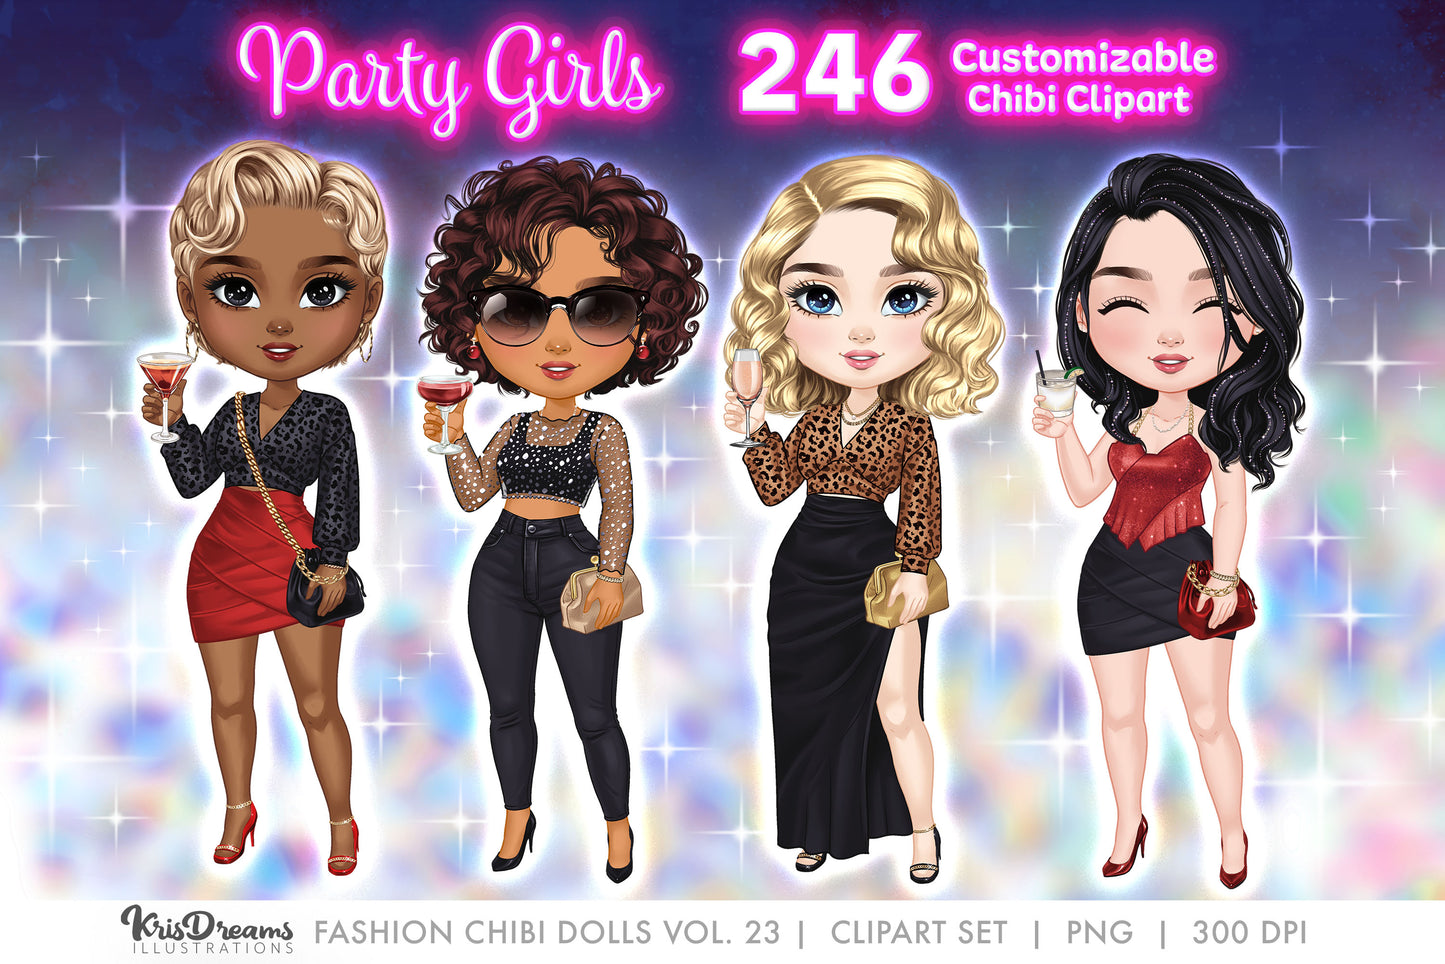 Chibi Best Friends Drinking Cocktail Clipart | Chibi Party Girls Sisters Night Out | Customizable Hair and Fashion Illustrations